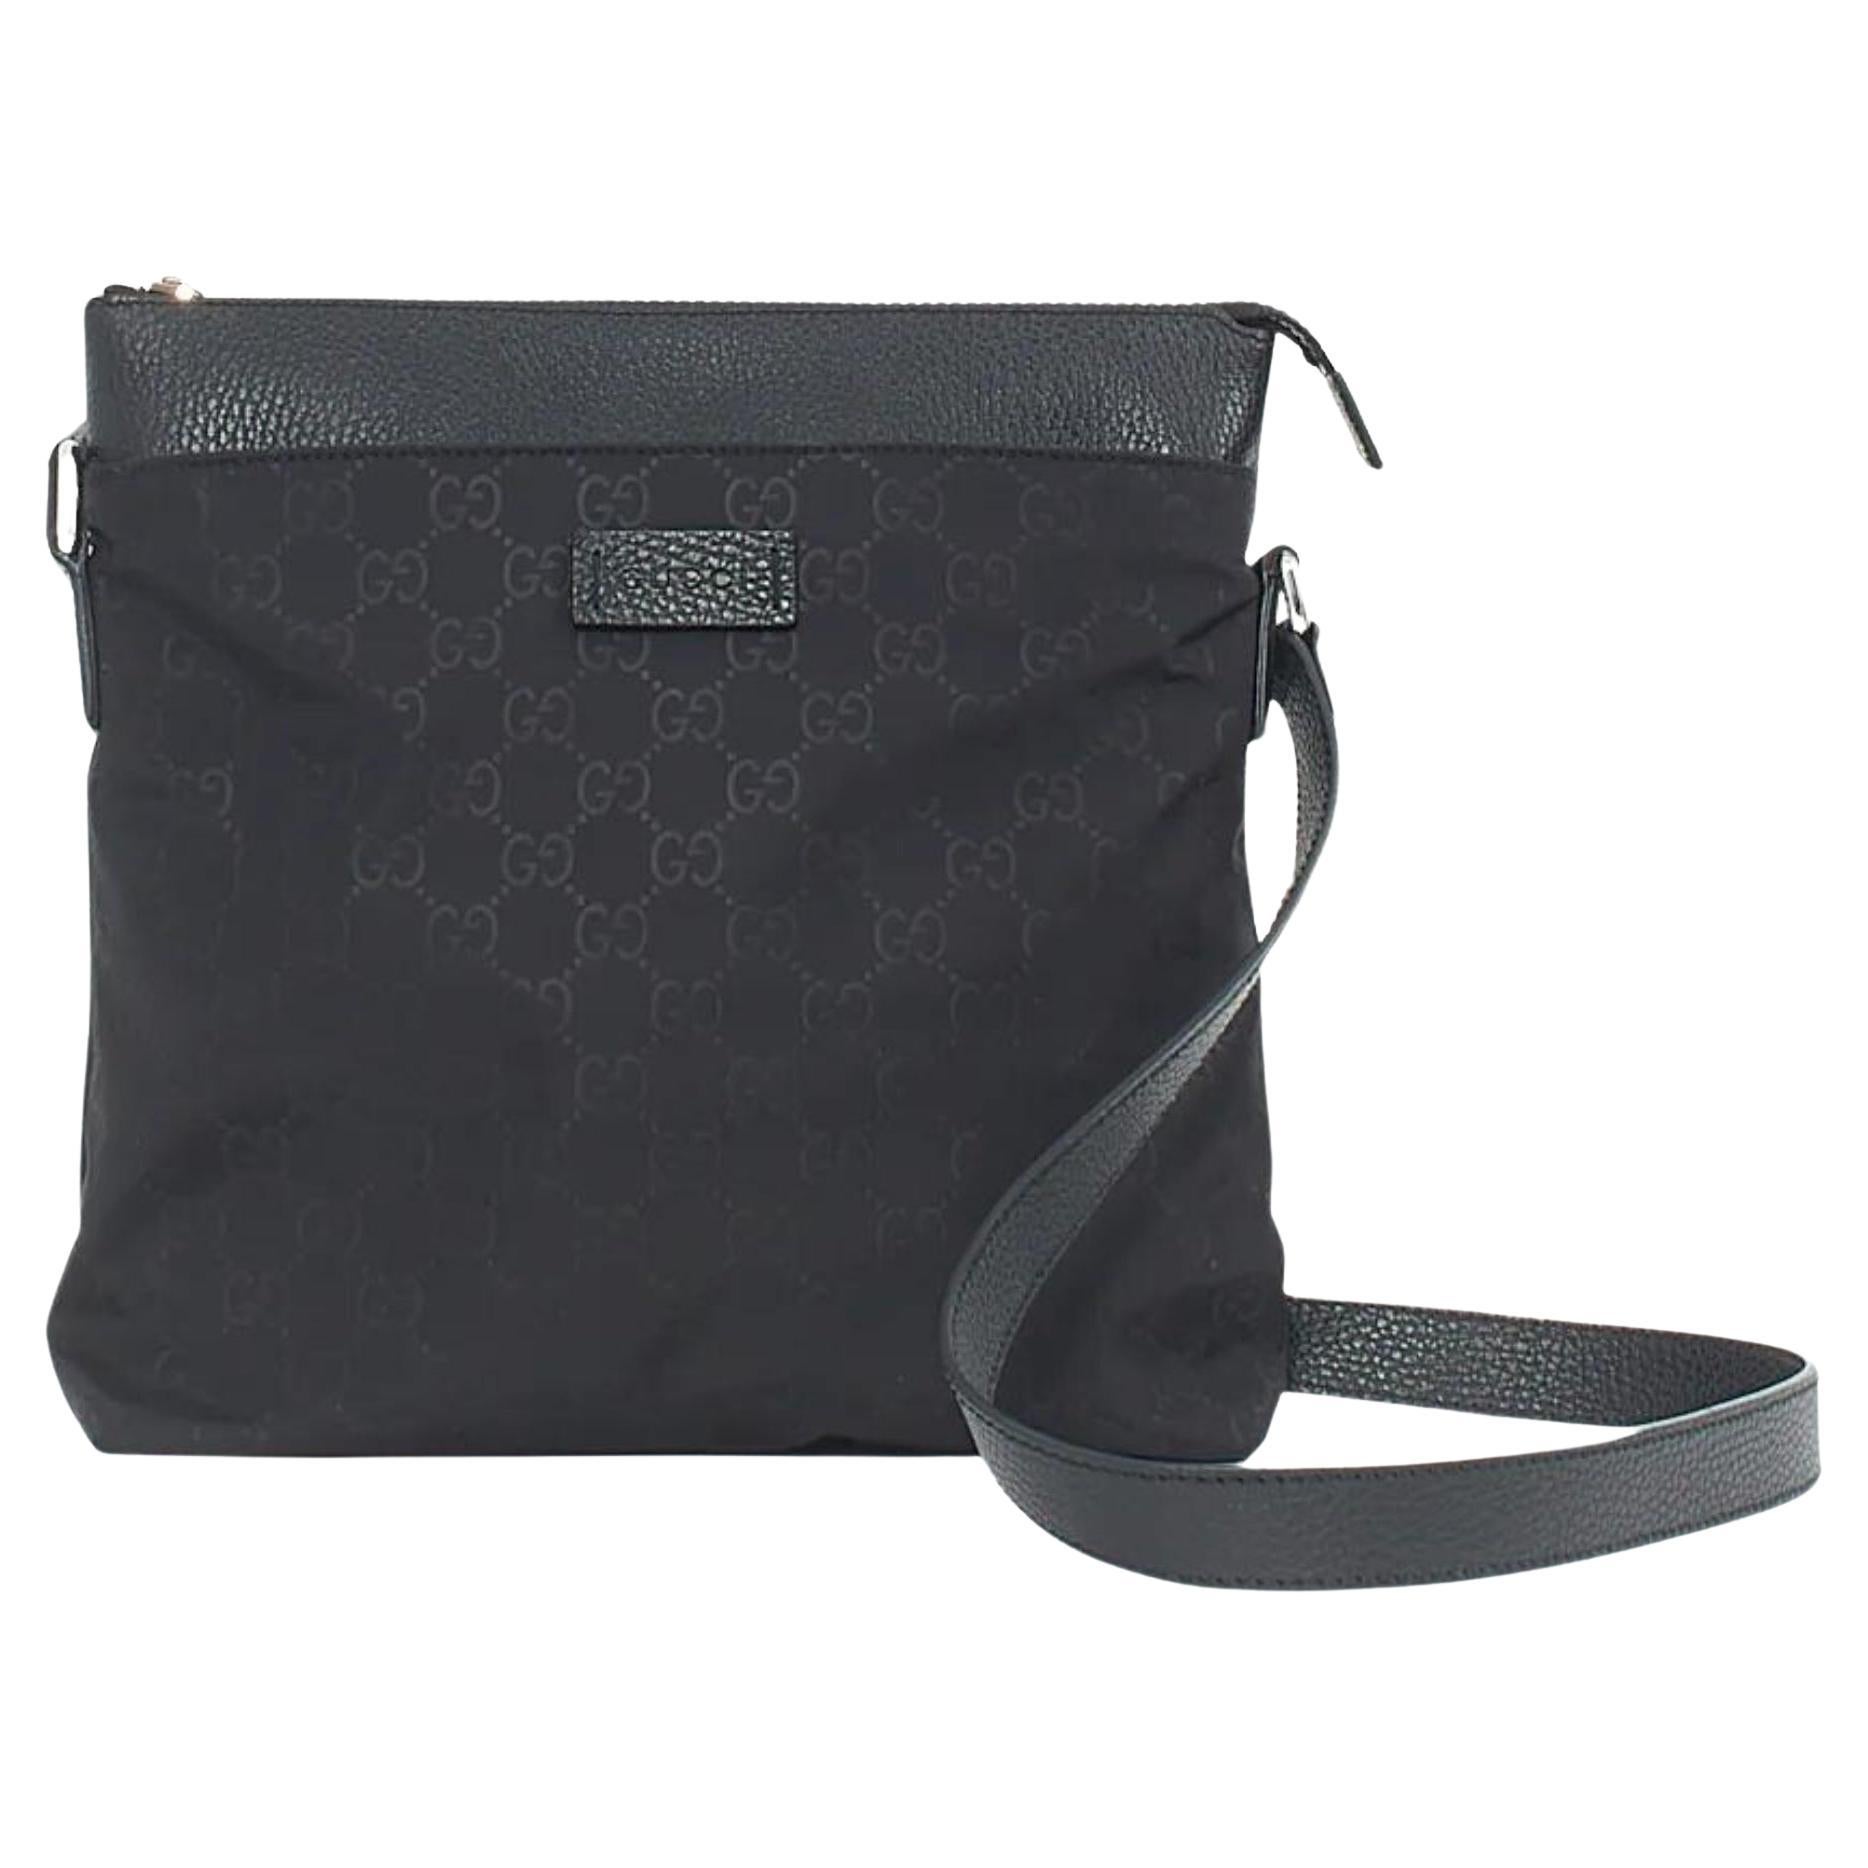 Gucci Black Nylon With Leather Trim Messenger Bag For Sale